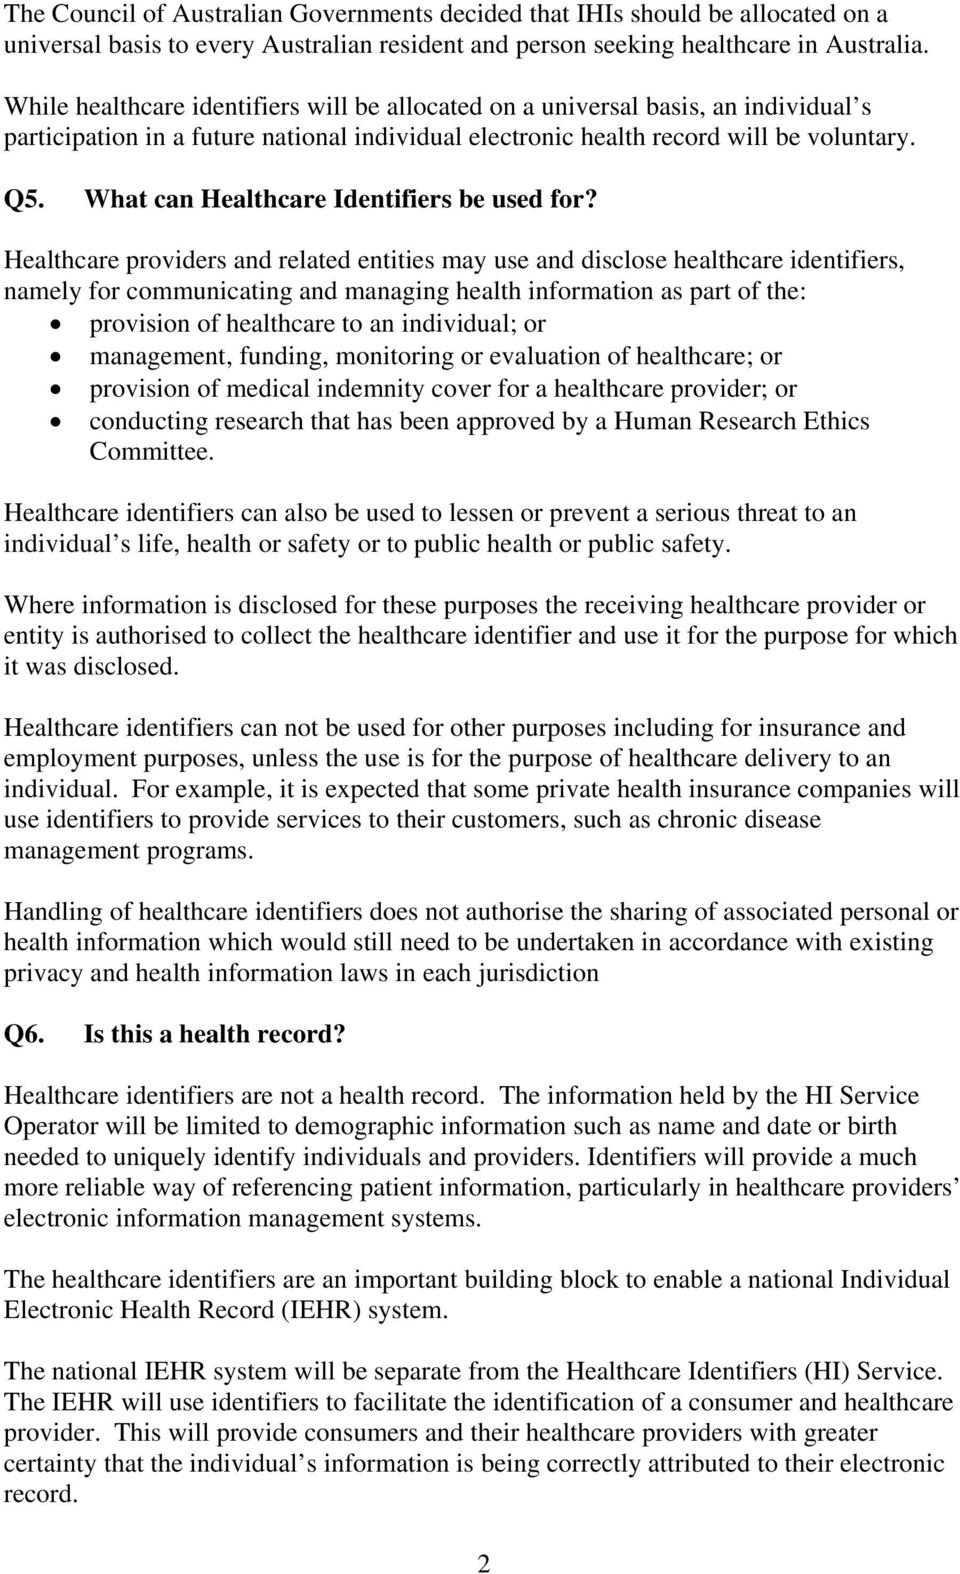 What can Healthcare Identifiers be used for?